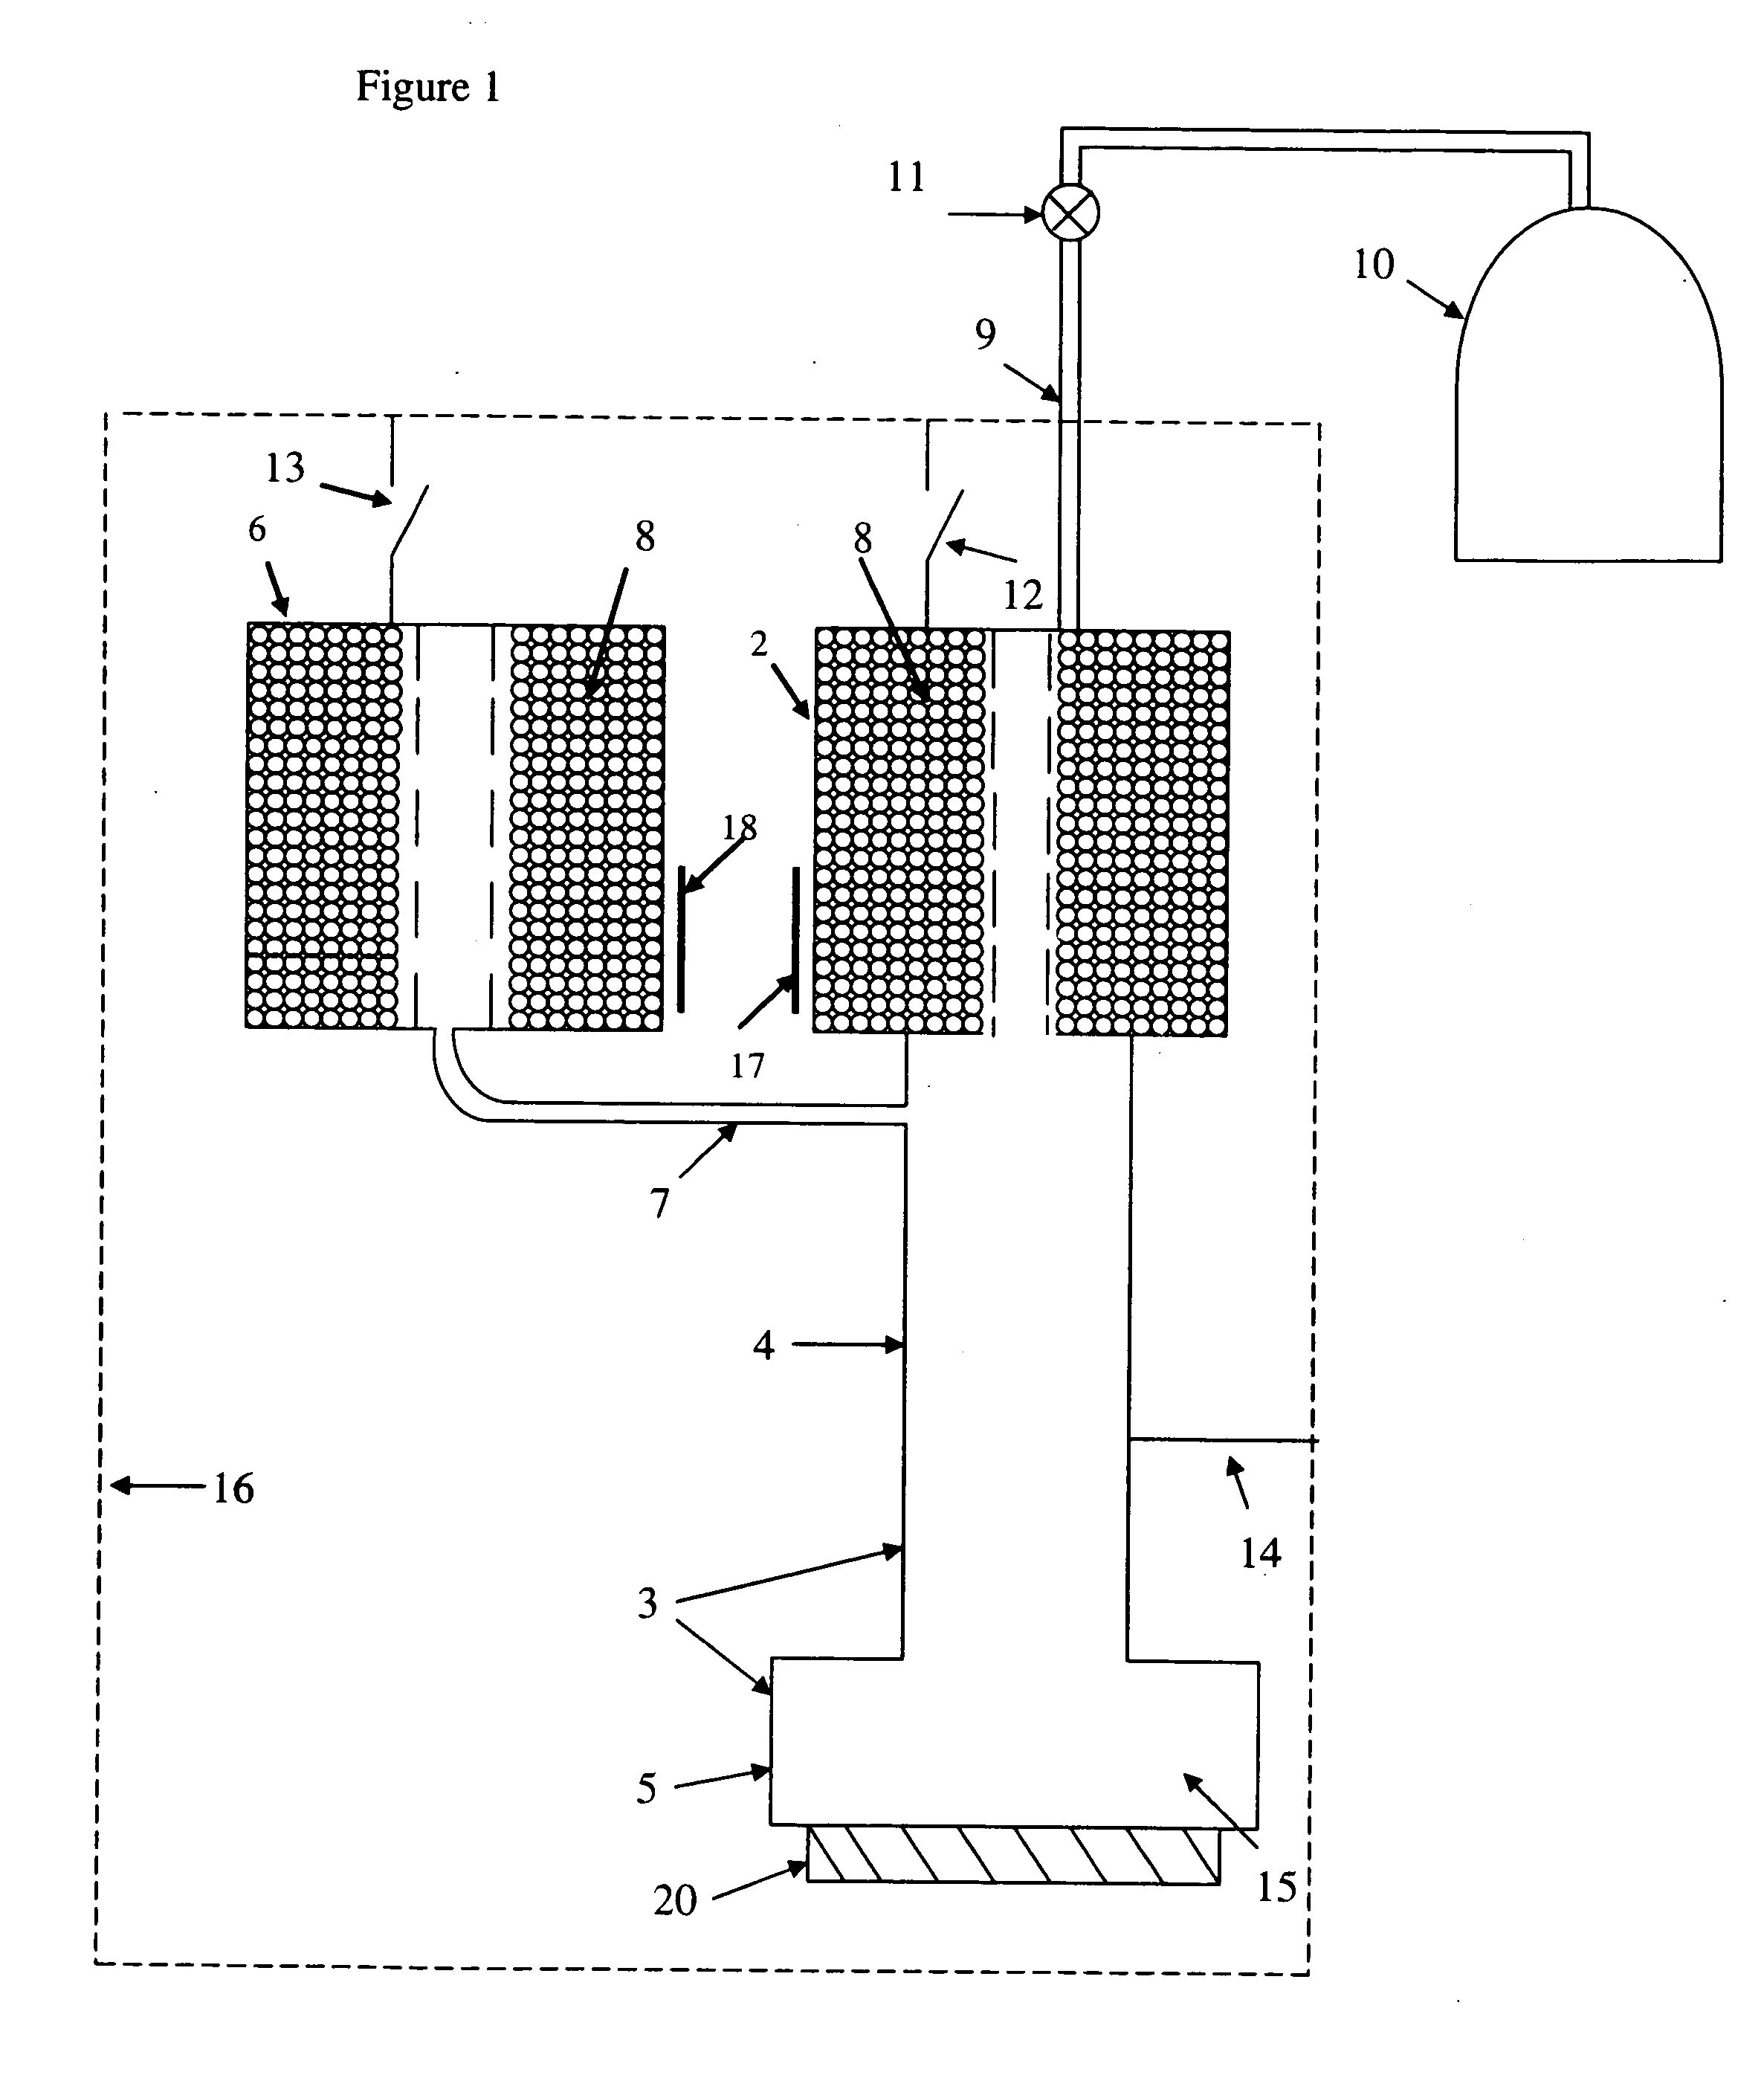 Method of operating an adsorption refrigeration system